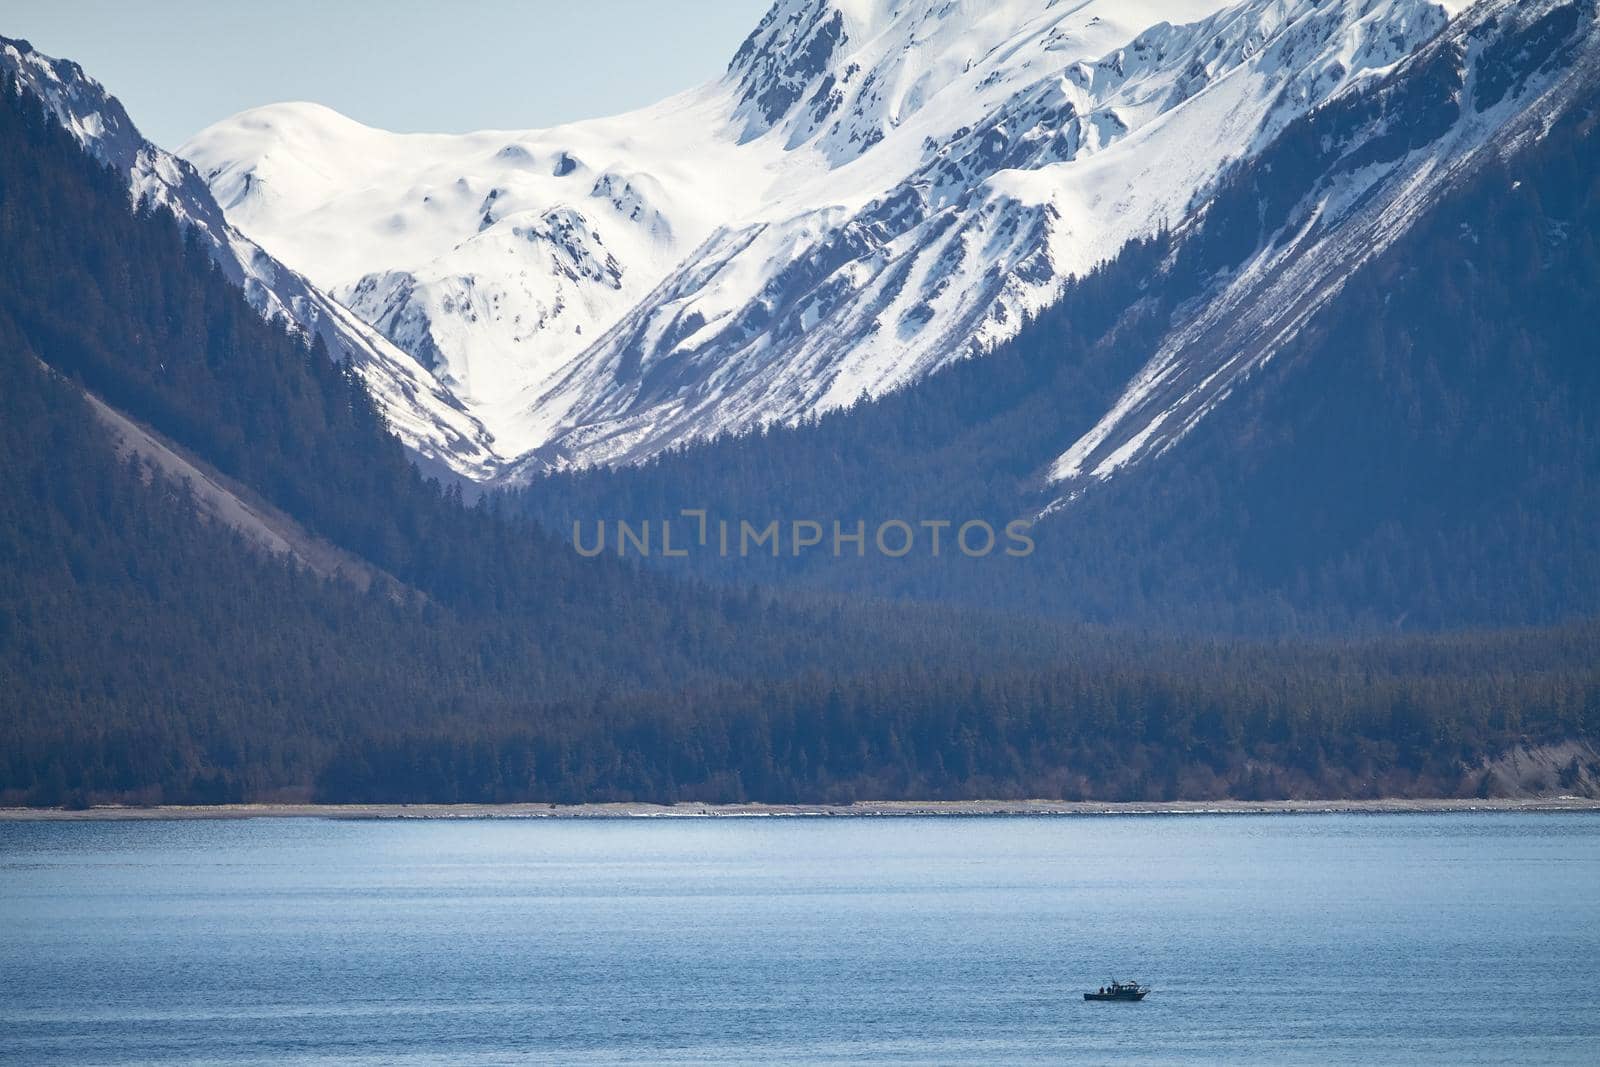 Small Ship within Great Alaskan Wilderness by wondry